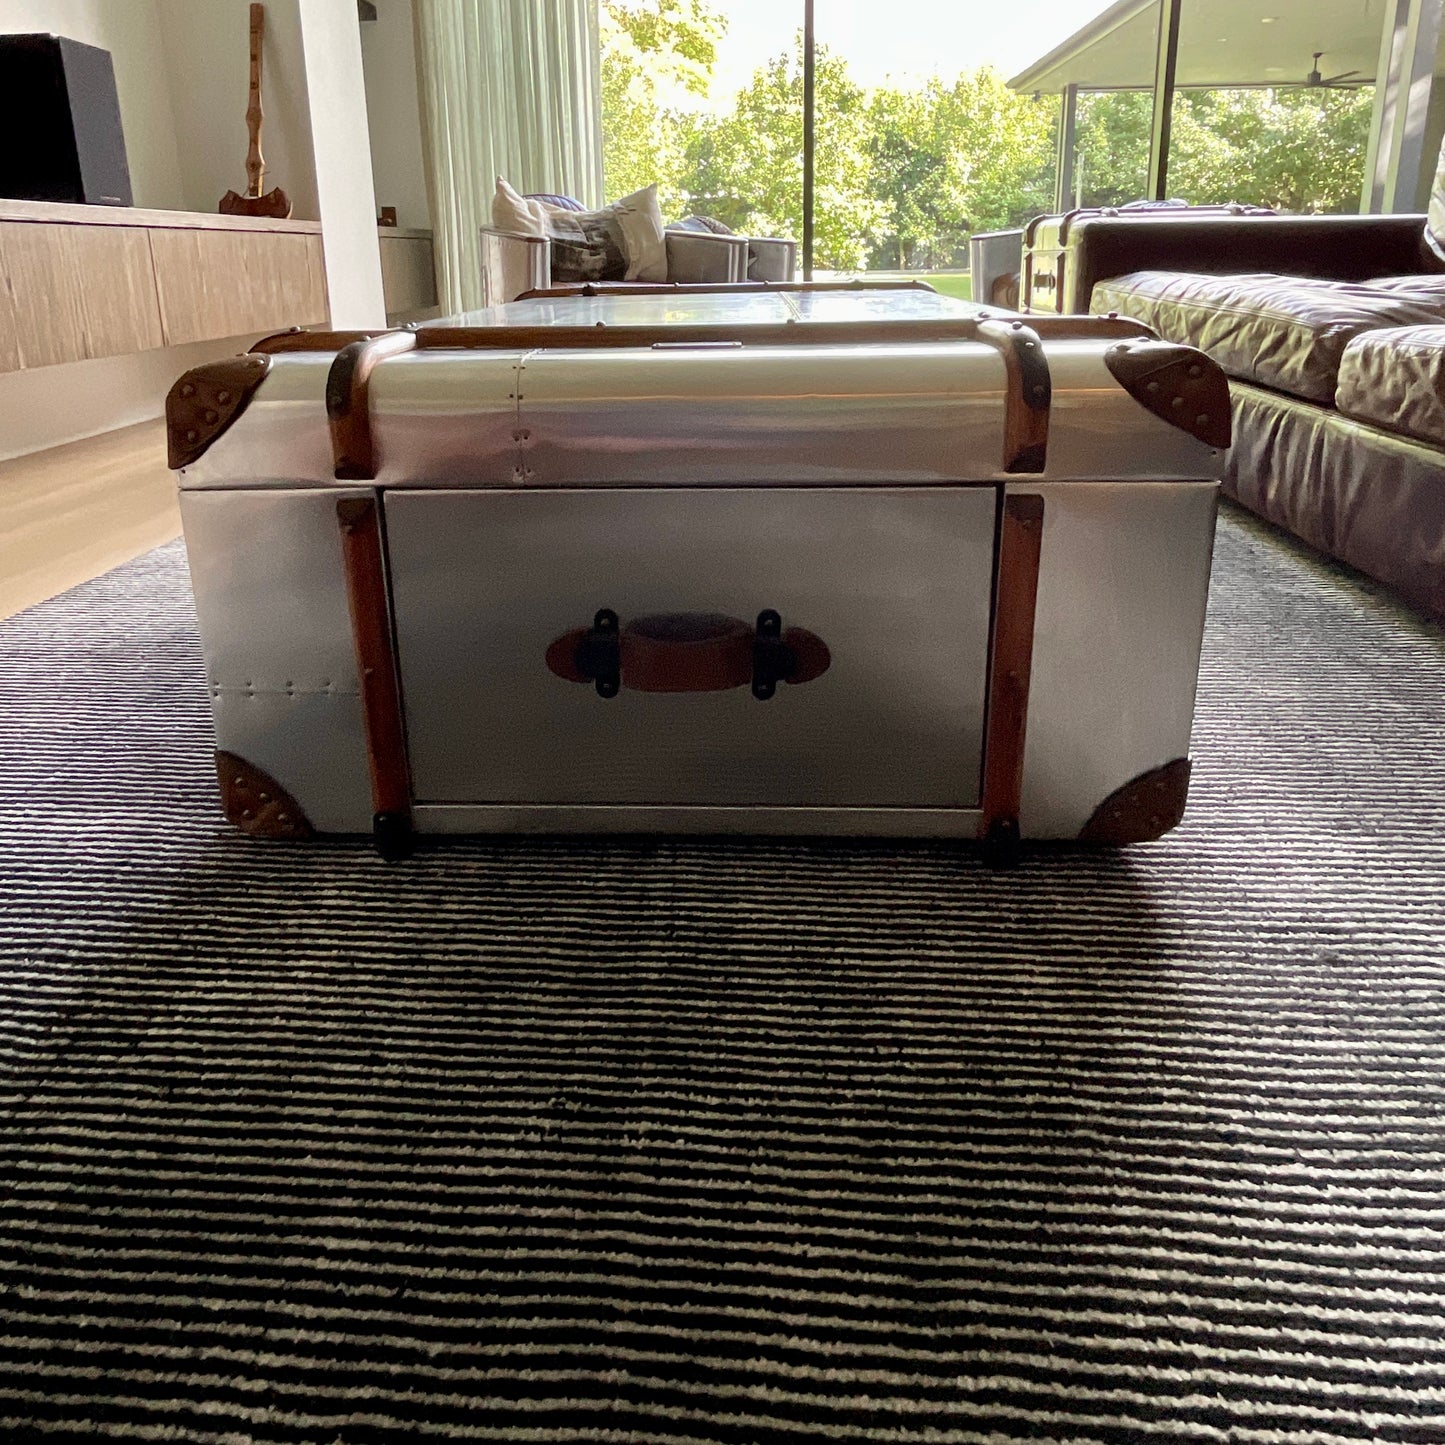 Richards Trunk Coffee Table by Timothy Oulton through Restoration Hardware